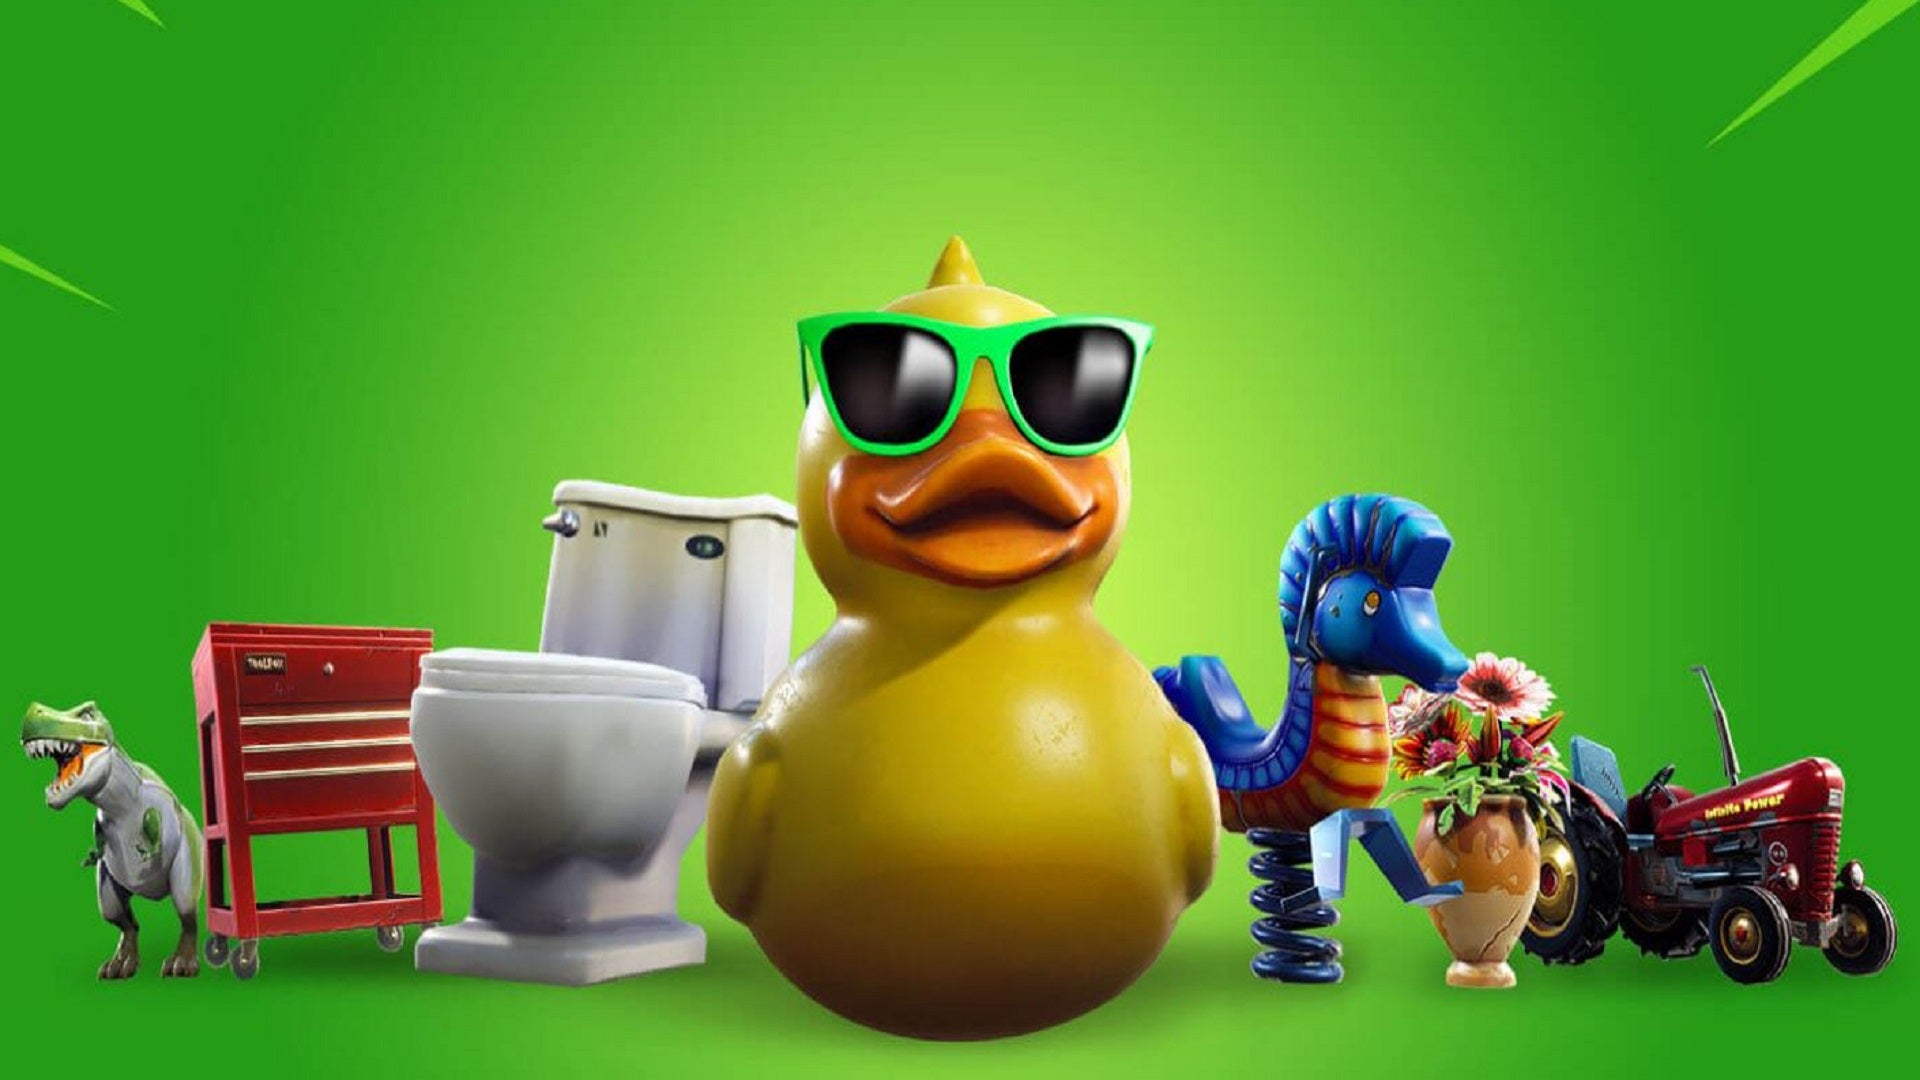 A toy dinosaur, a tool trolley, a toilet, a rubber duck in sunglasses, a seahorse spring rocker, a cracked vase with flowers, and a tractor lined up against a green background.